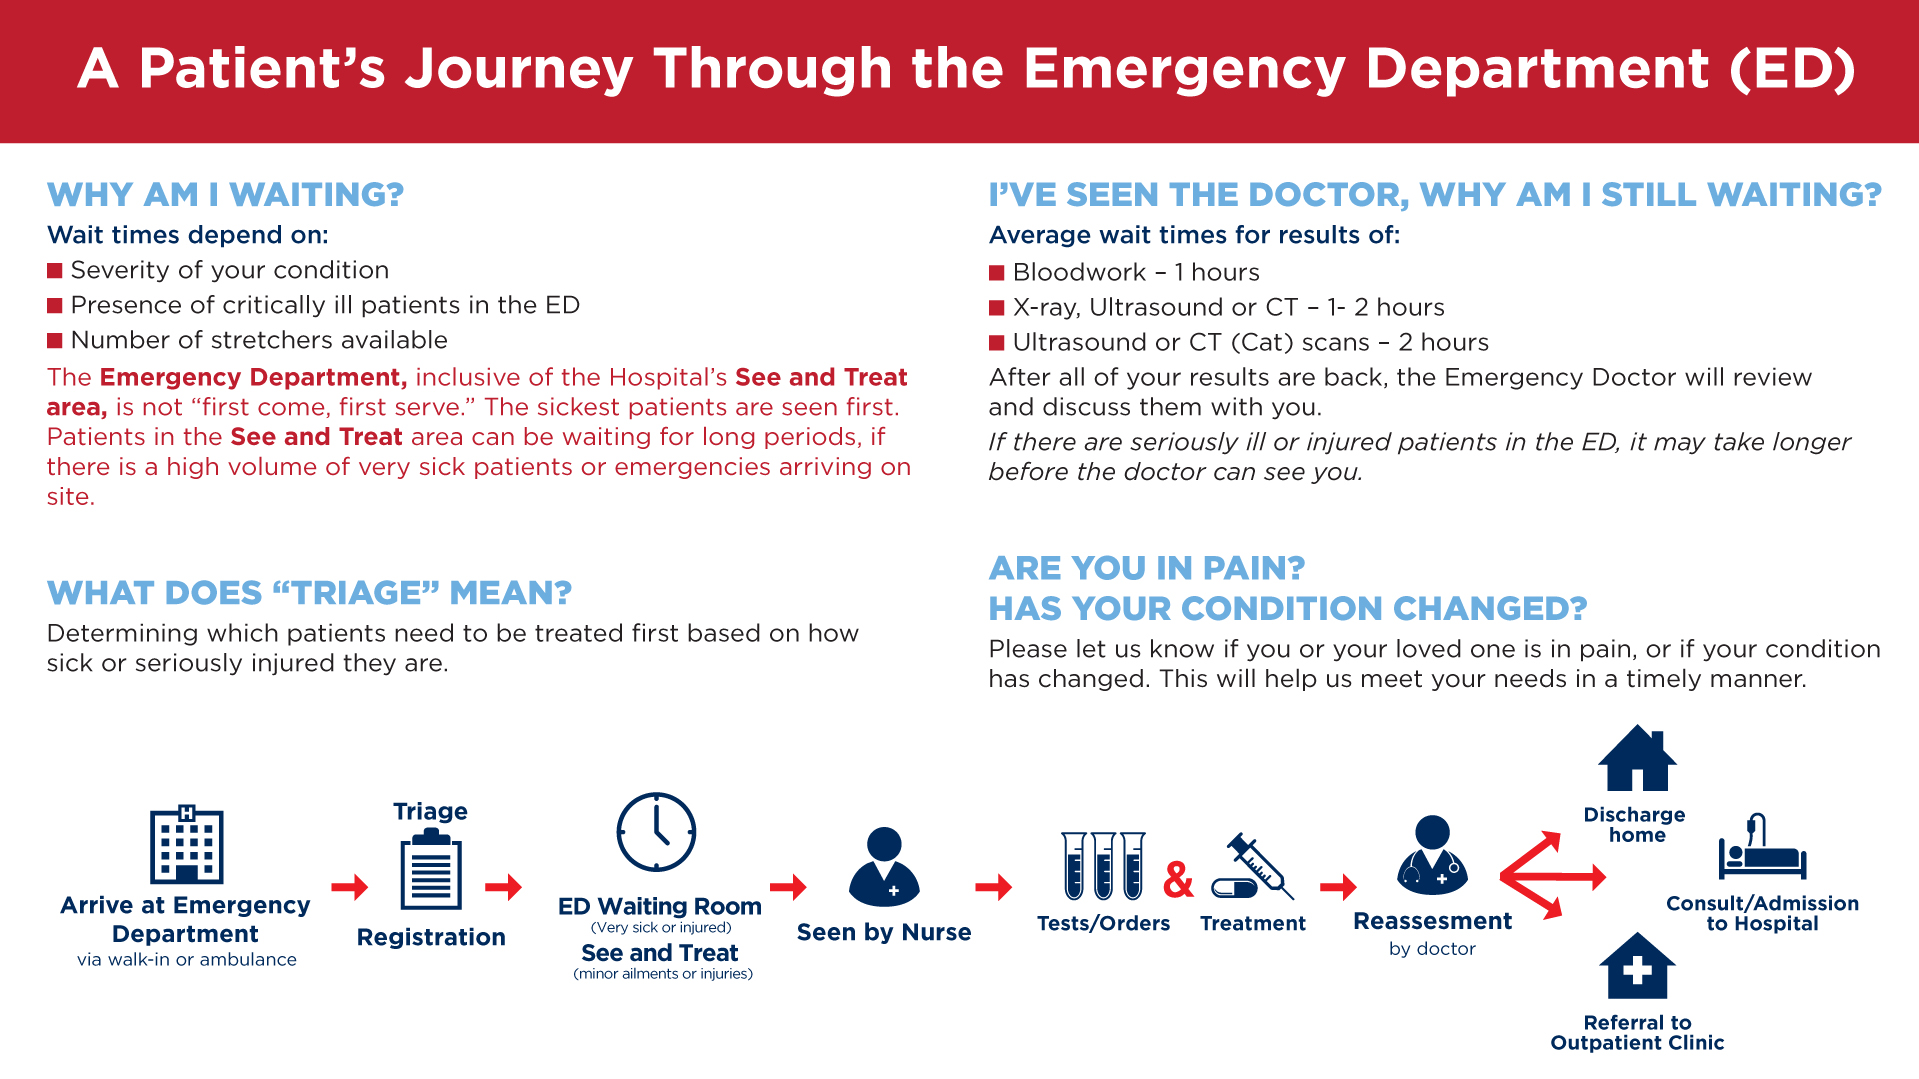 image with text which describes a patient's journey through the emergency department